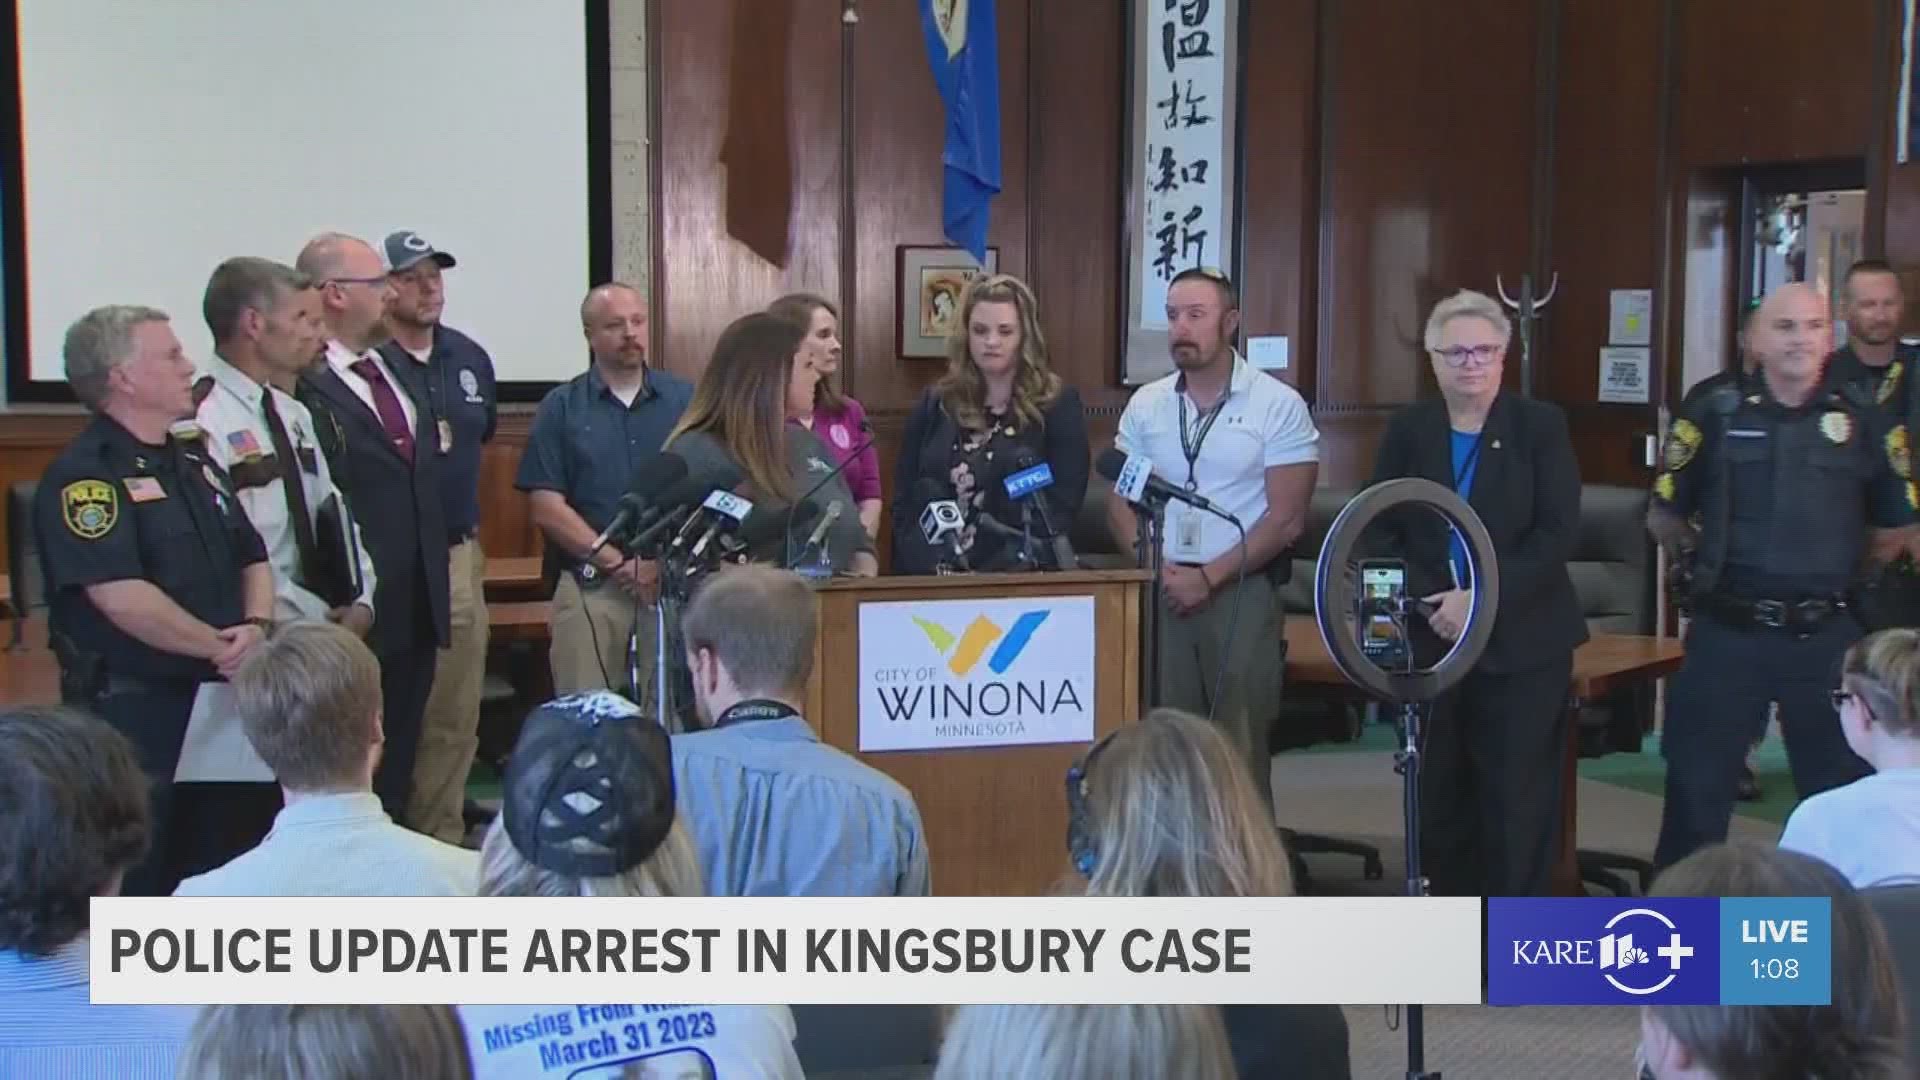 Authorities in southeastern Minnesota shared details regarding the arrest of Adam Fravel on suspicion of second-degree murder in Maddi Kingsbury's death.